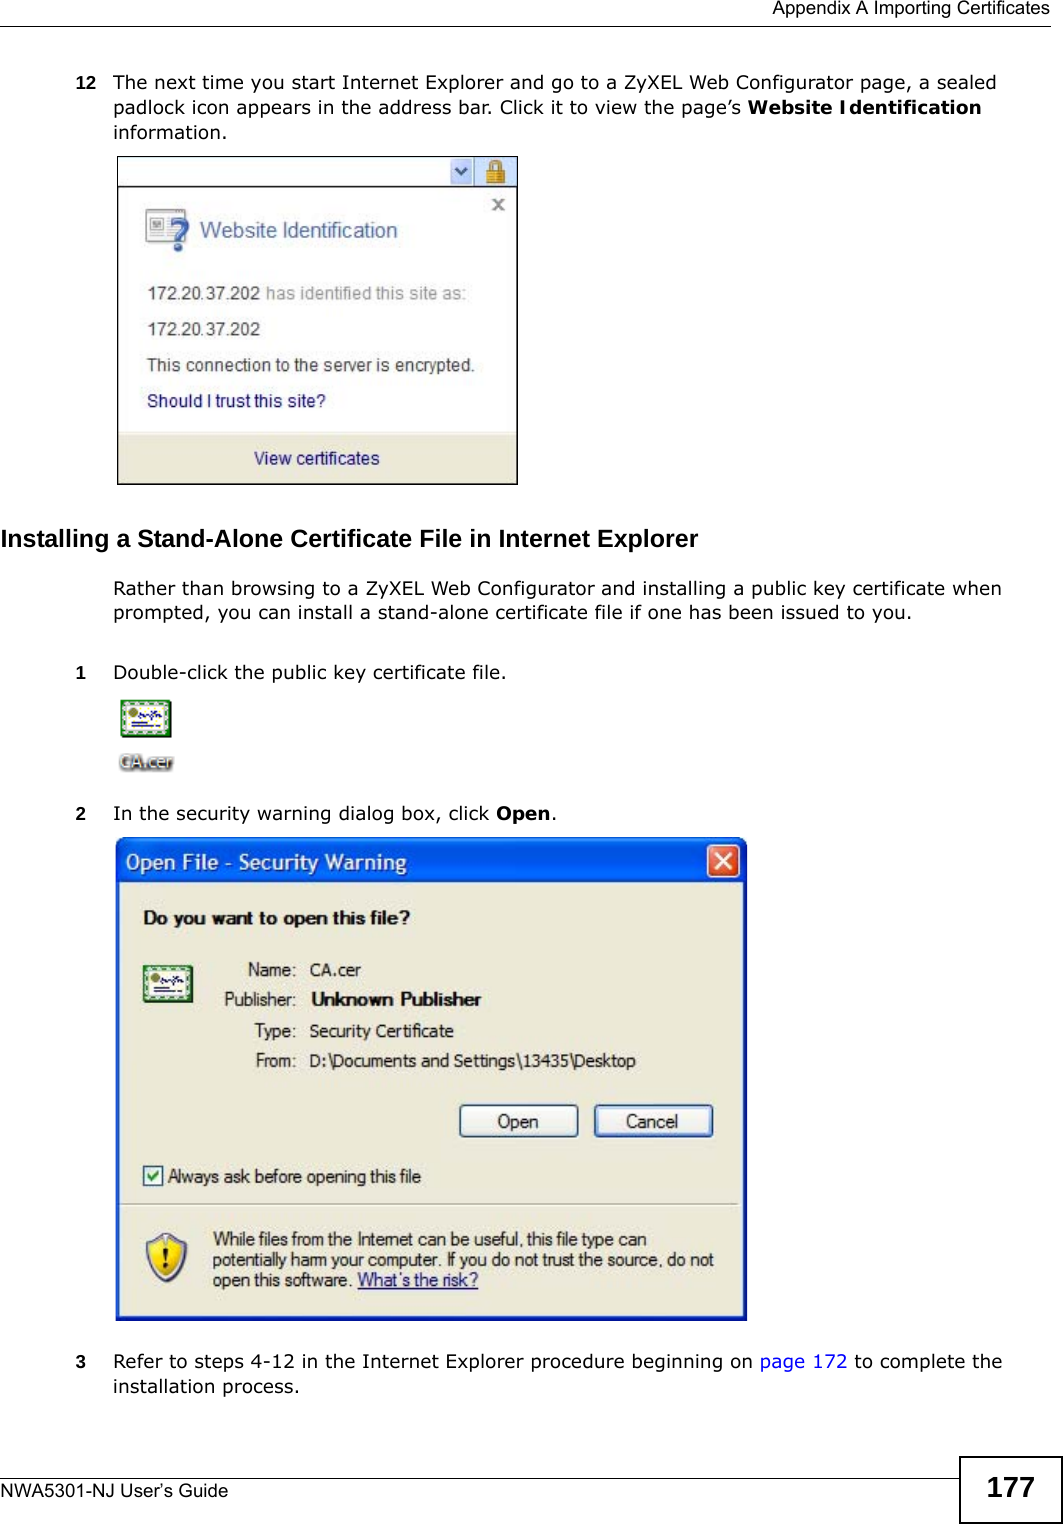  Appendix A Importing CertificatesNWA5301-NJ User’s Guide 17712 The next time you start Internet Explorer and go to a ZyXEL Web Configurator page, a sealed padlock icon appears in the address bar. Click it to view the page’s Website Identification information.Installing a Stand-Alone Certificate File in Internet ExplorerRather than browsing to a ZyXEL Web Configurator and installing a public key certificate when prompted, you can install a stand-alone certificate file if one has been issued to you.1Double-click the public key certificate file.2In the security warning dialog box, click Open.3Refer to steps 4-12 in the Internet Explorer procedure beginning on page 172 to complete the installation process.